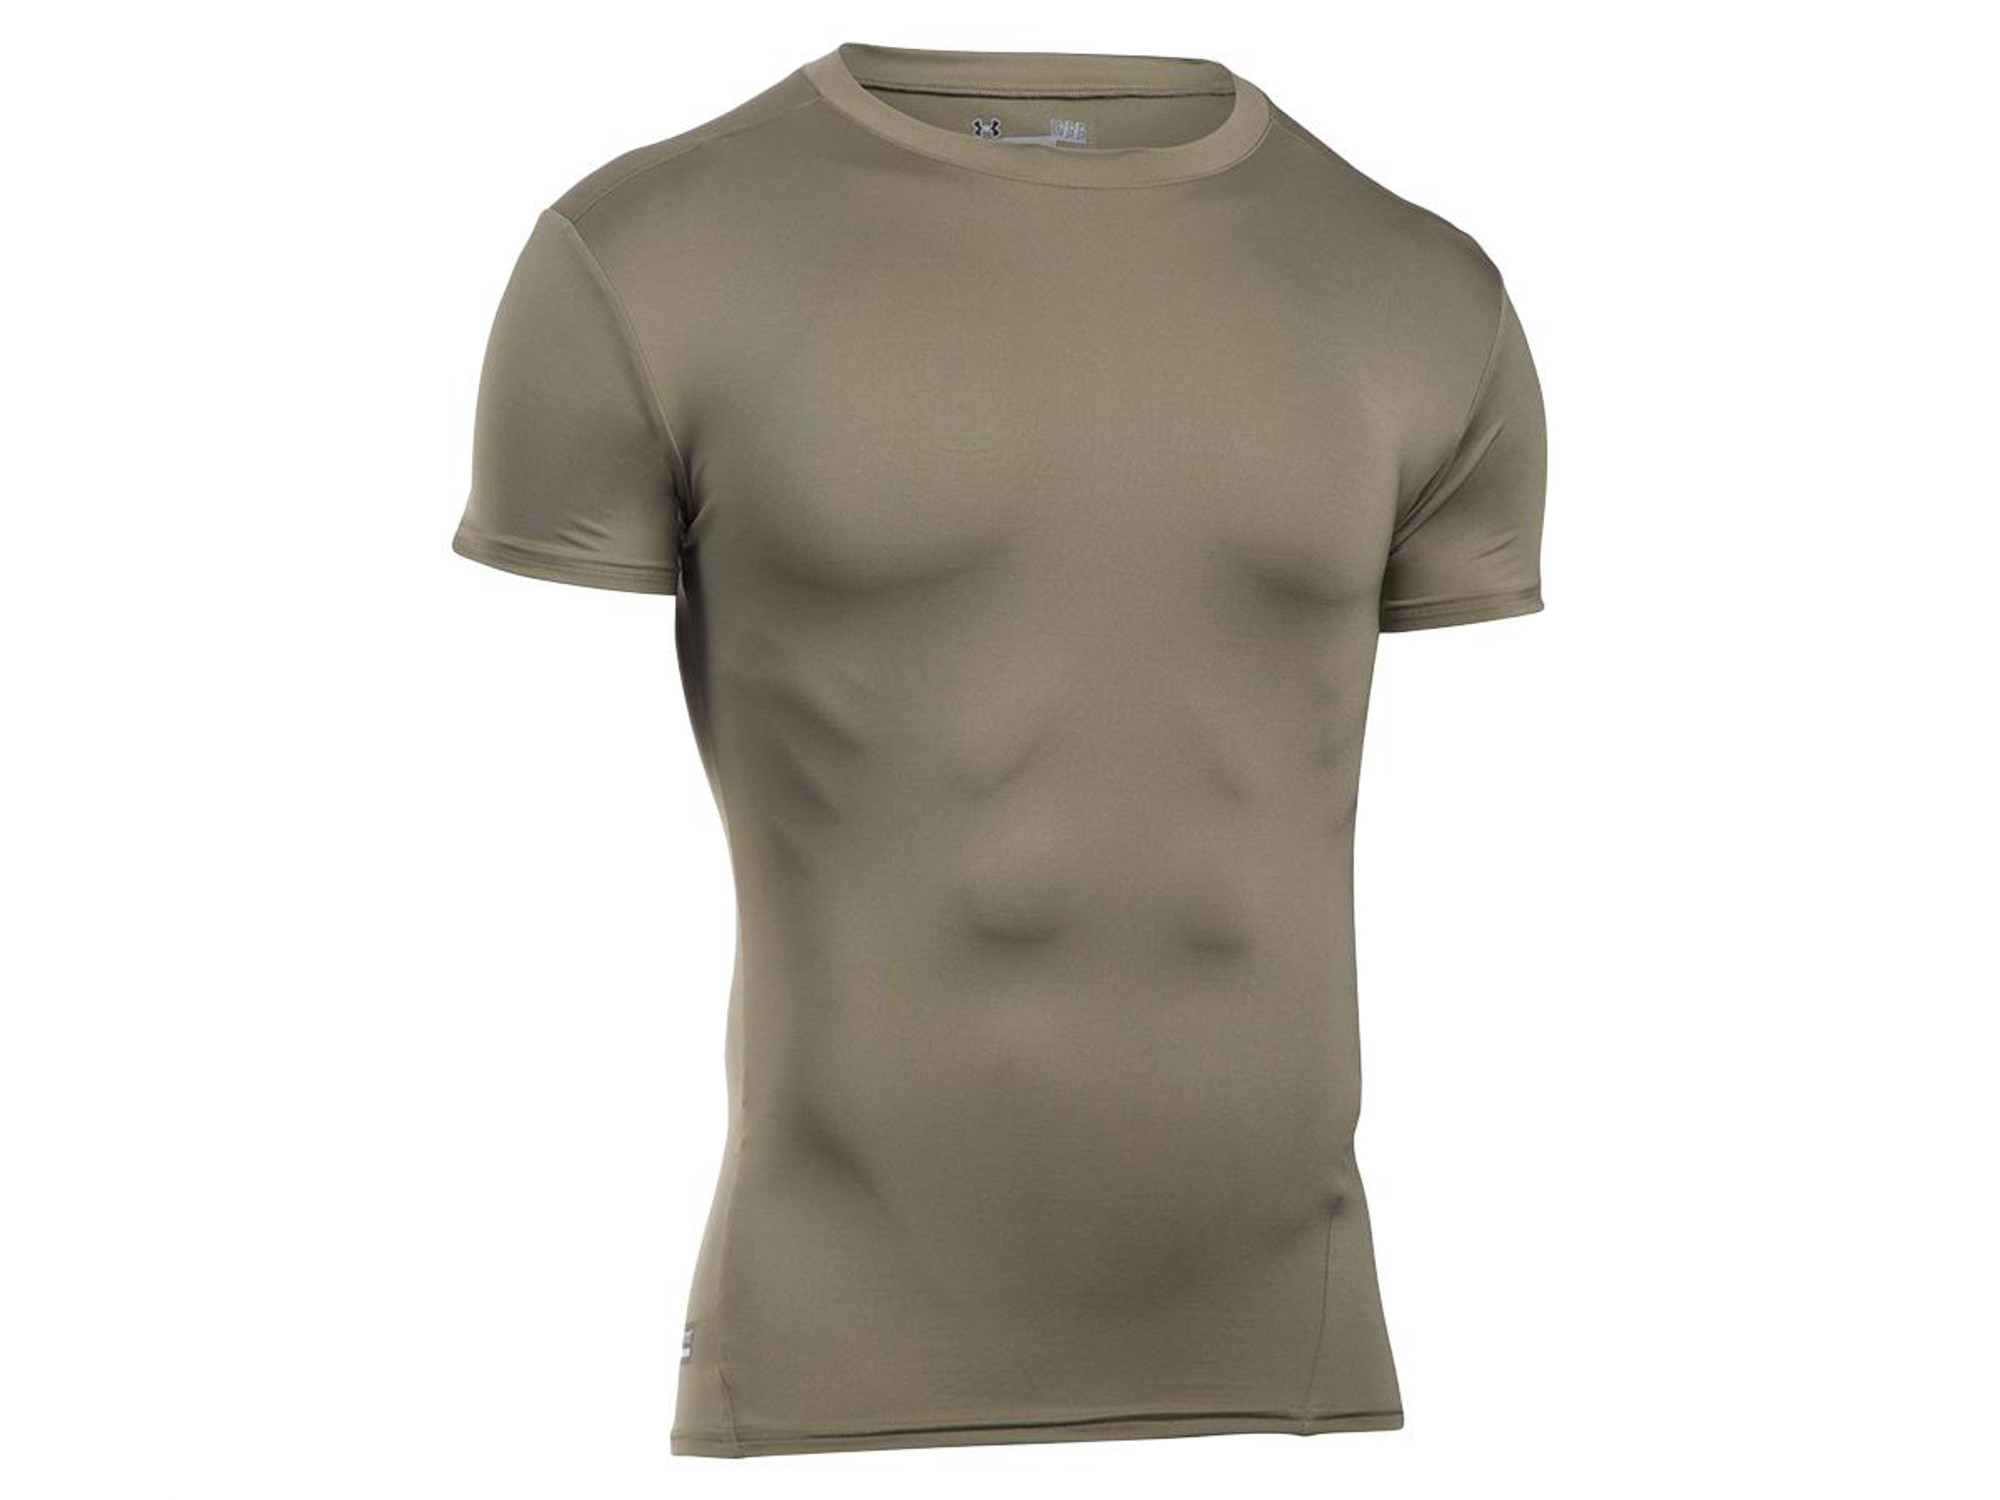 Under Armour Men's Tactical Heatgear® Compression Short Sleeve T-Shirt - Federal Tan (Size: X-Large)